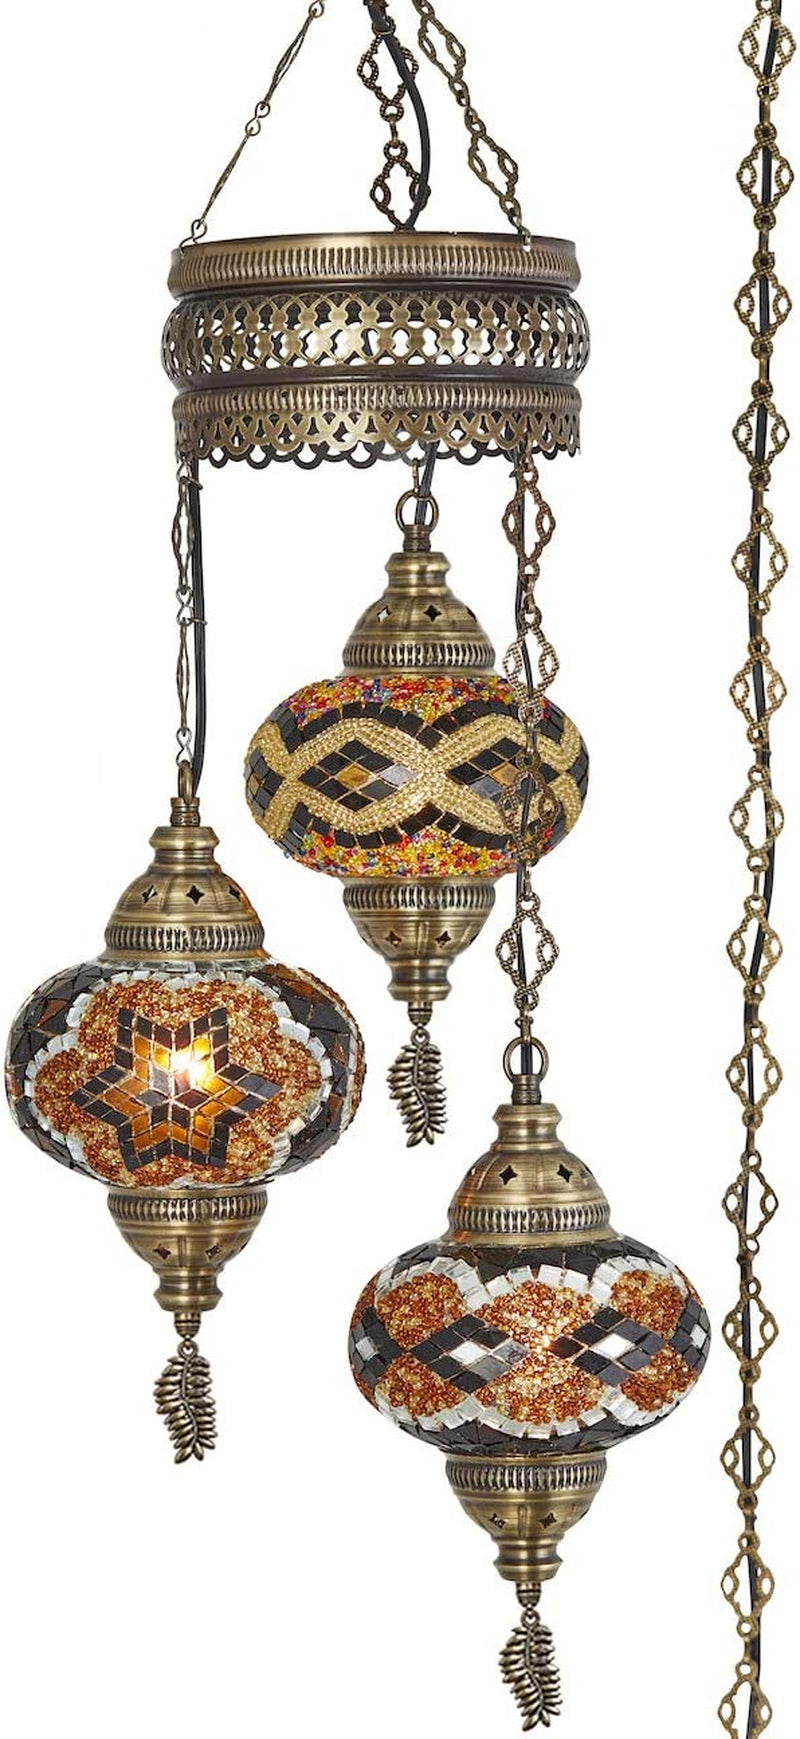 DEMMEX Turkish Moroccan Mosaic Hardwired or Swag Plug in Chandelier Light Ceiling Hanging Lamp Pendant Fixture, 3 Big Globes (3 X 7 Globes Swag)